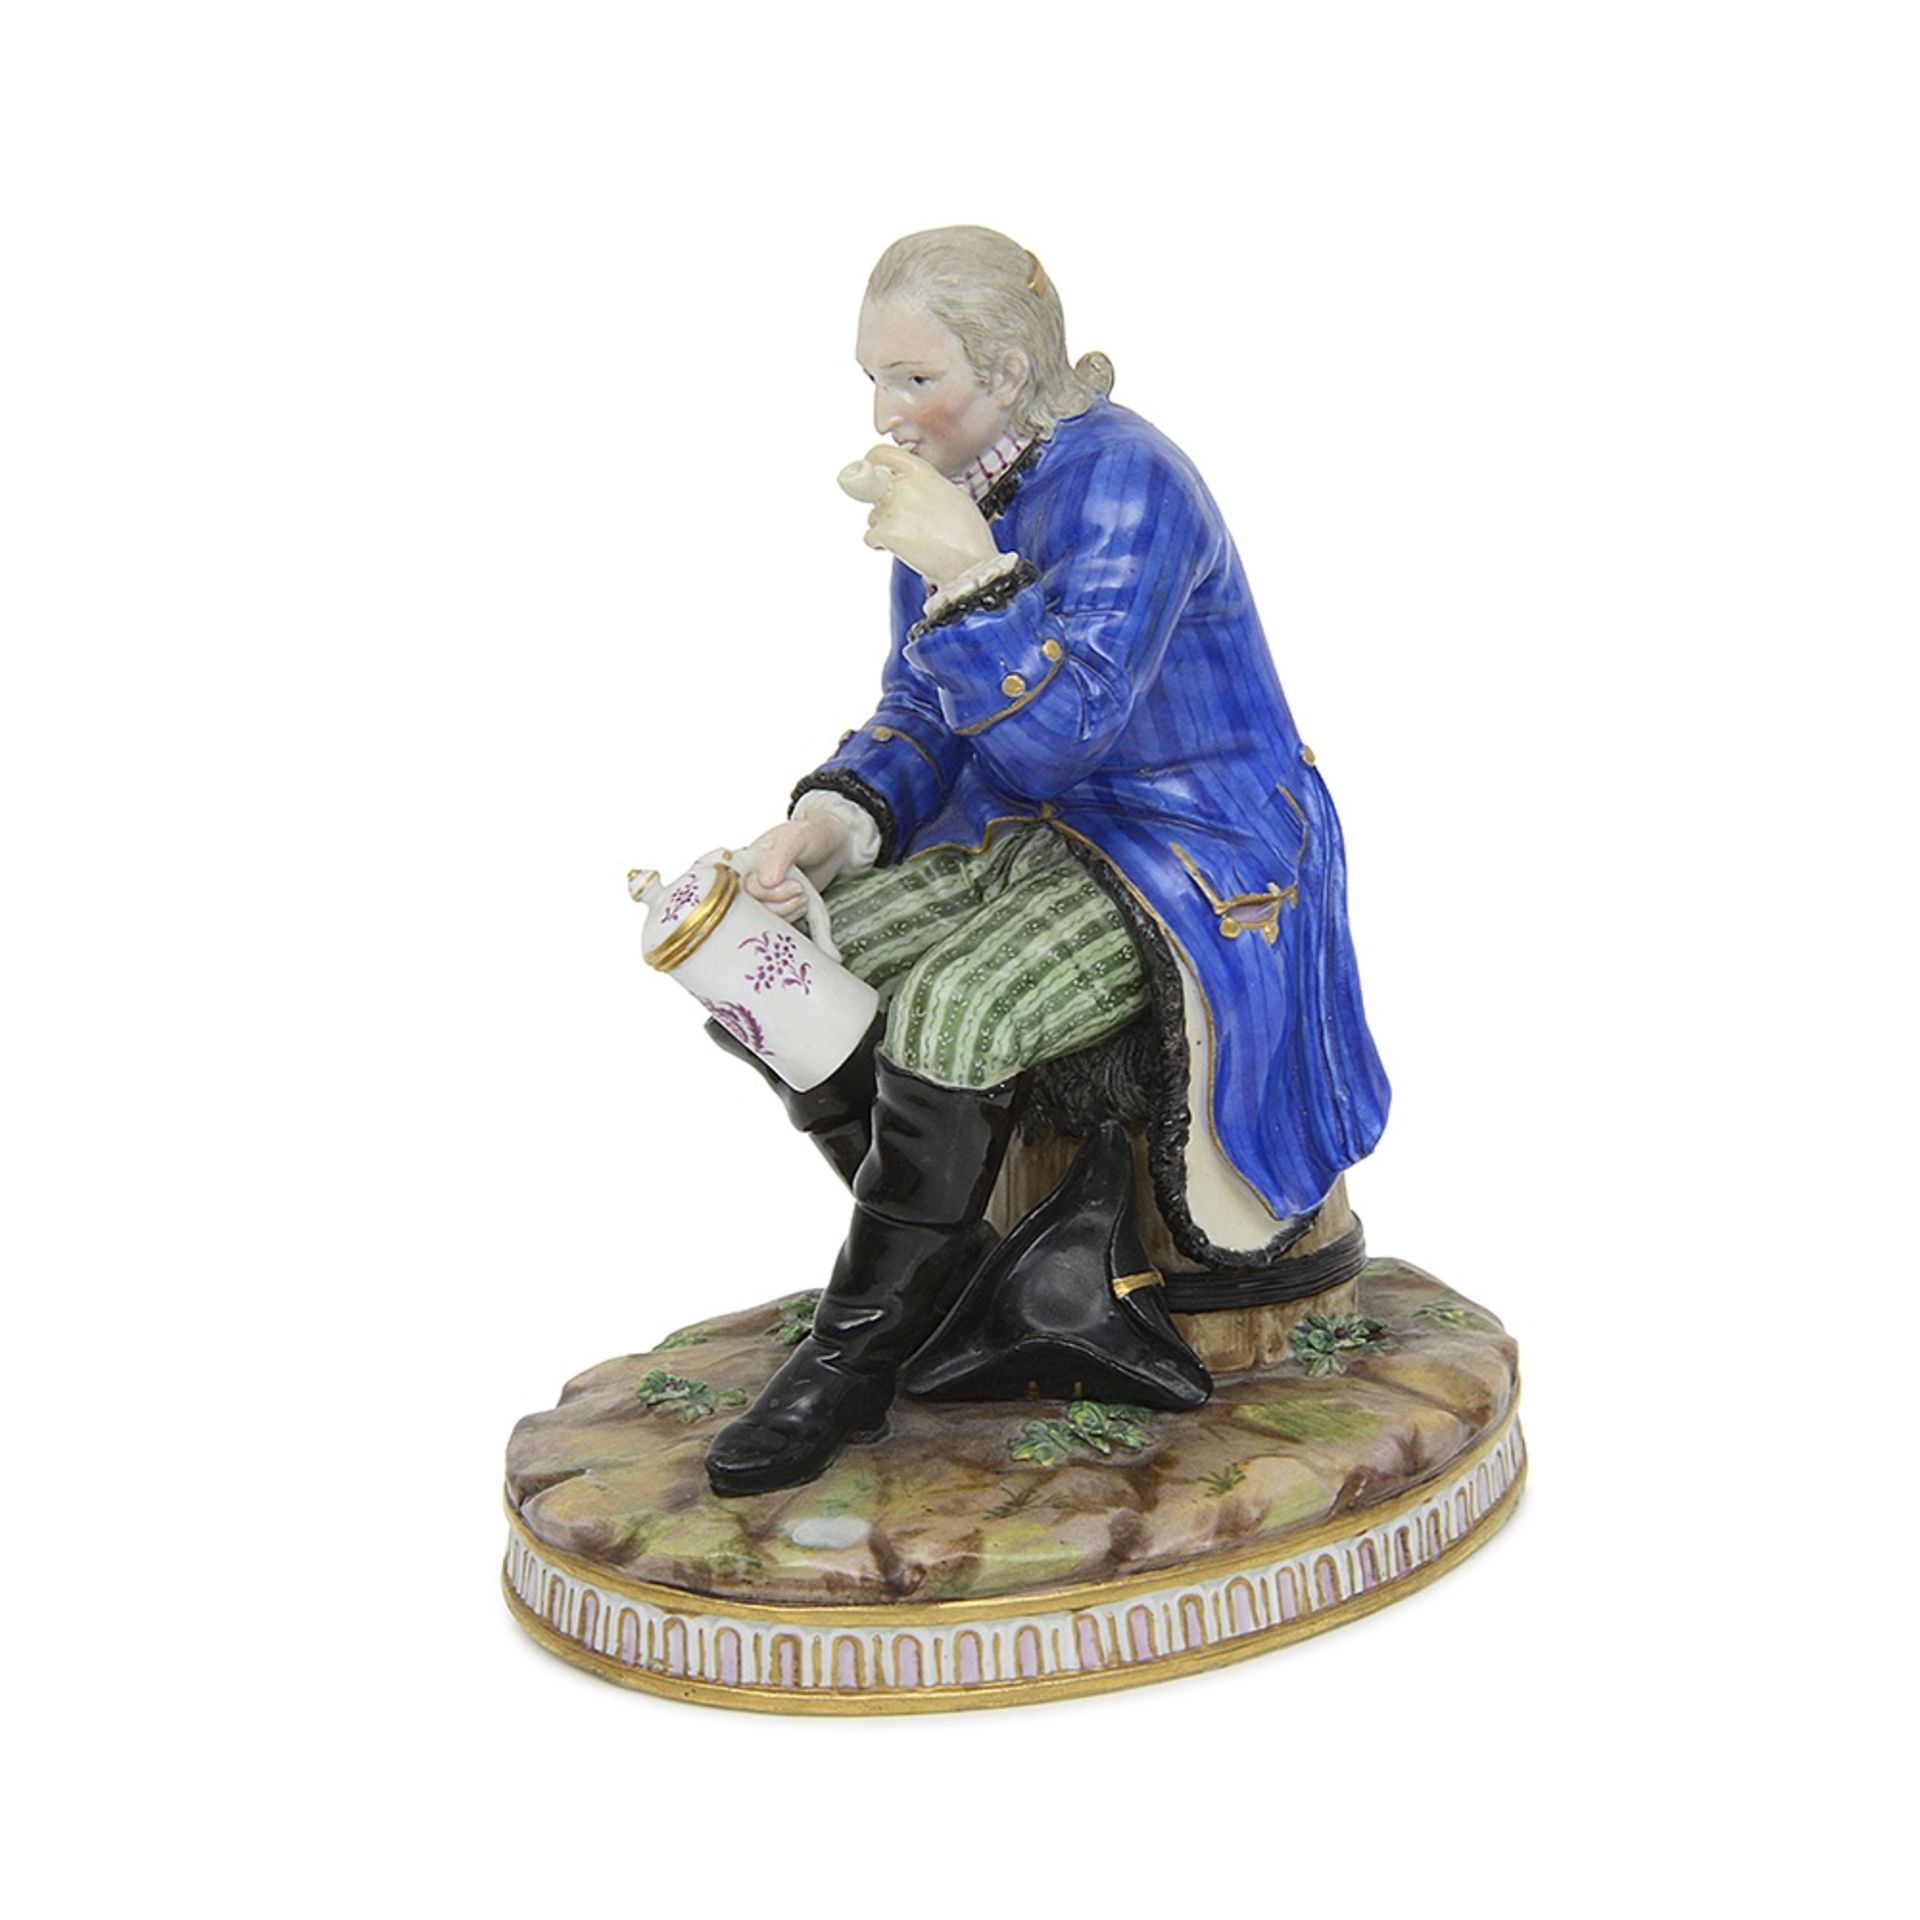 MEISSEN: AN EARLY 19TH CENTURY PORCELAIN FIGURE OF A GENTLEMAN SMOKING A PIPE - Image 3 of 4